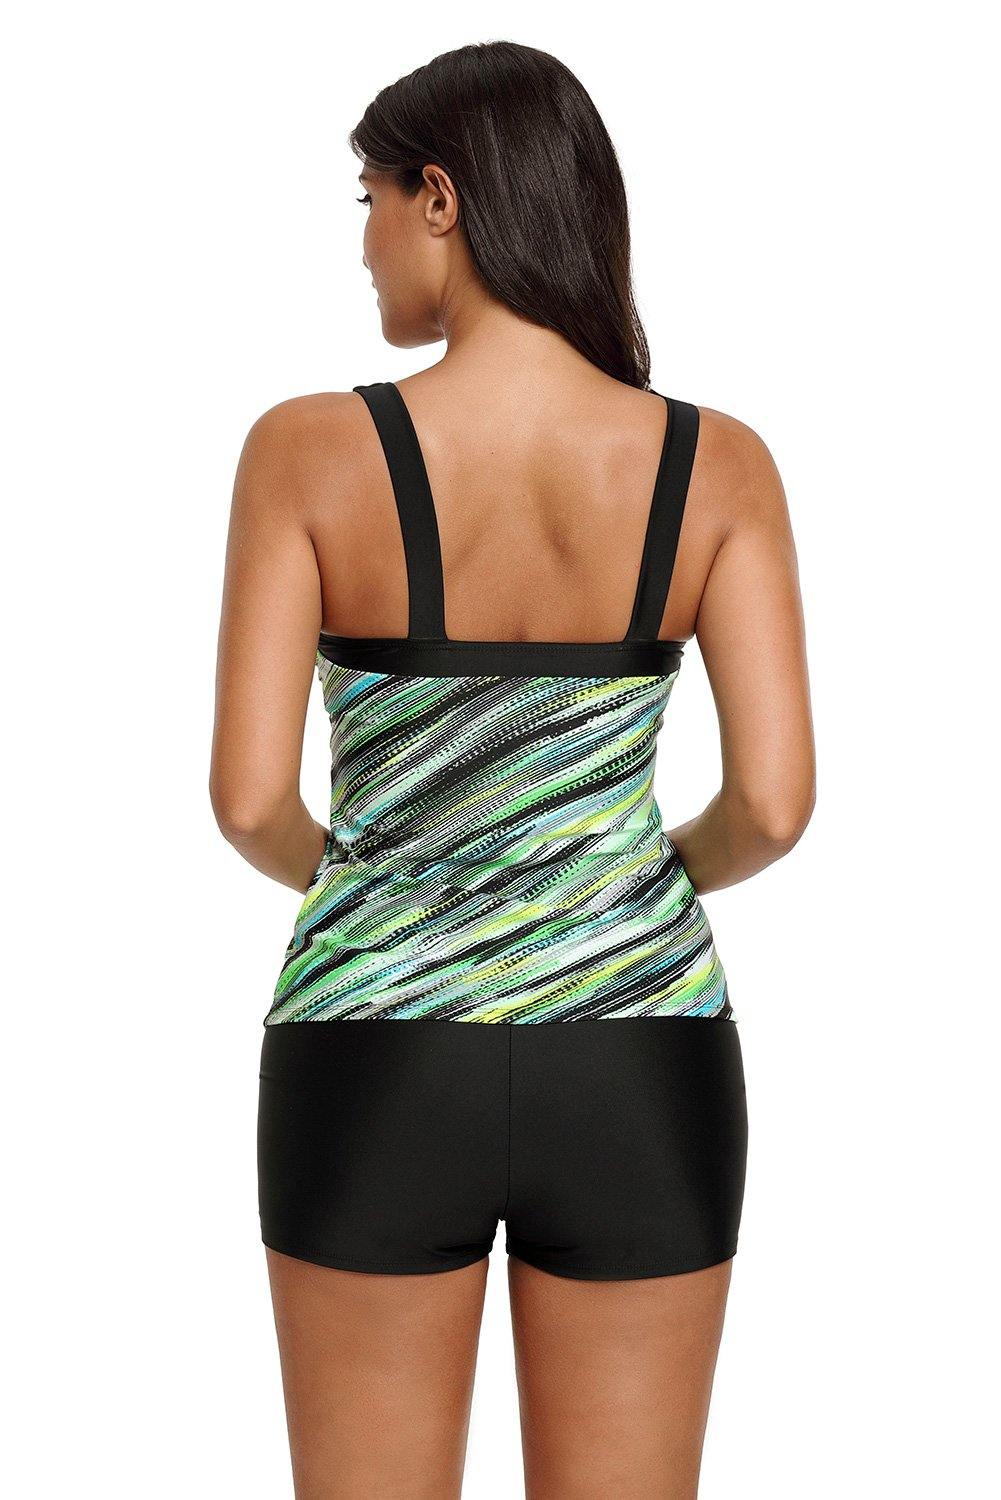 Abstract Printed Camisole Tankini Top - L & M Kee, LLC